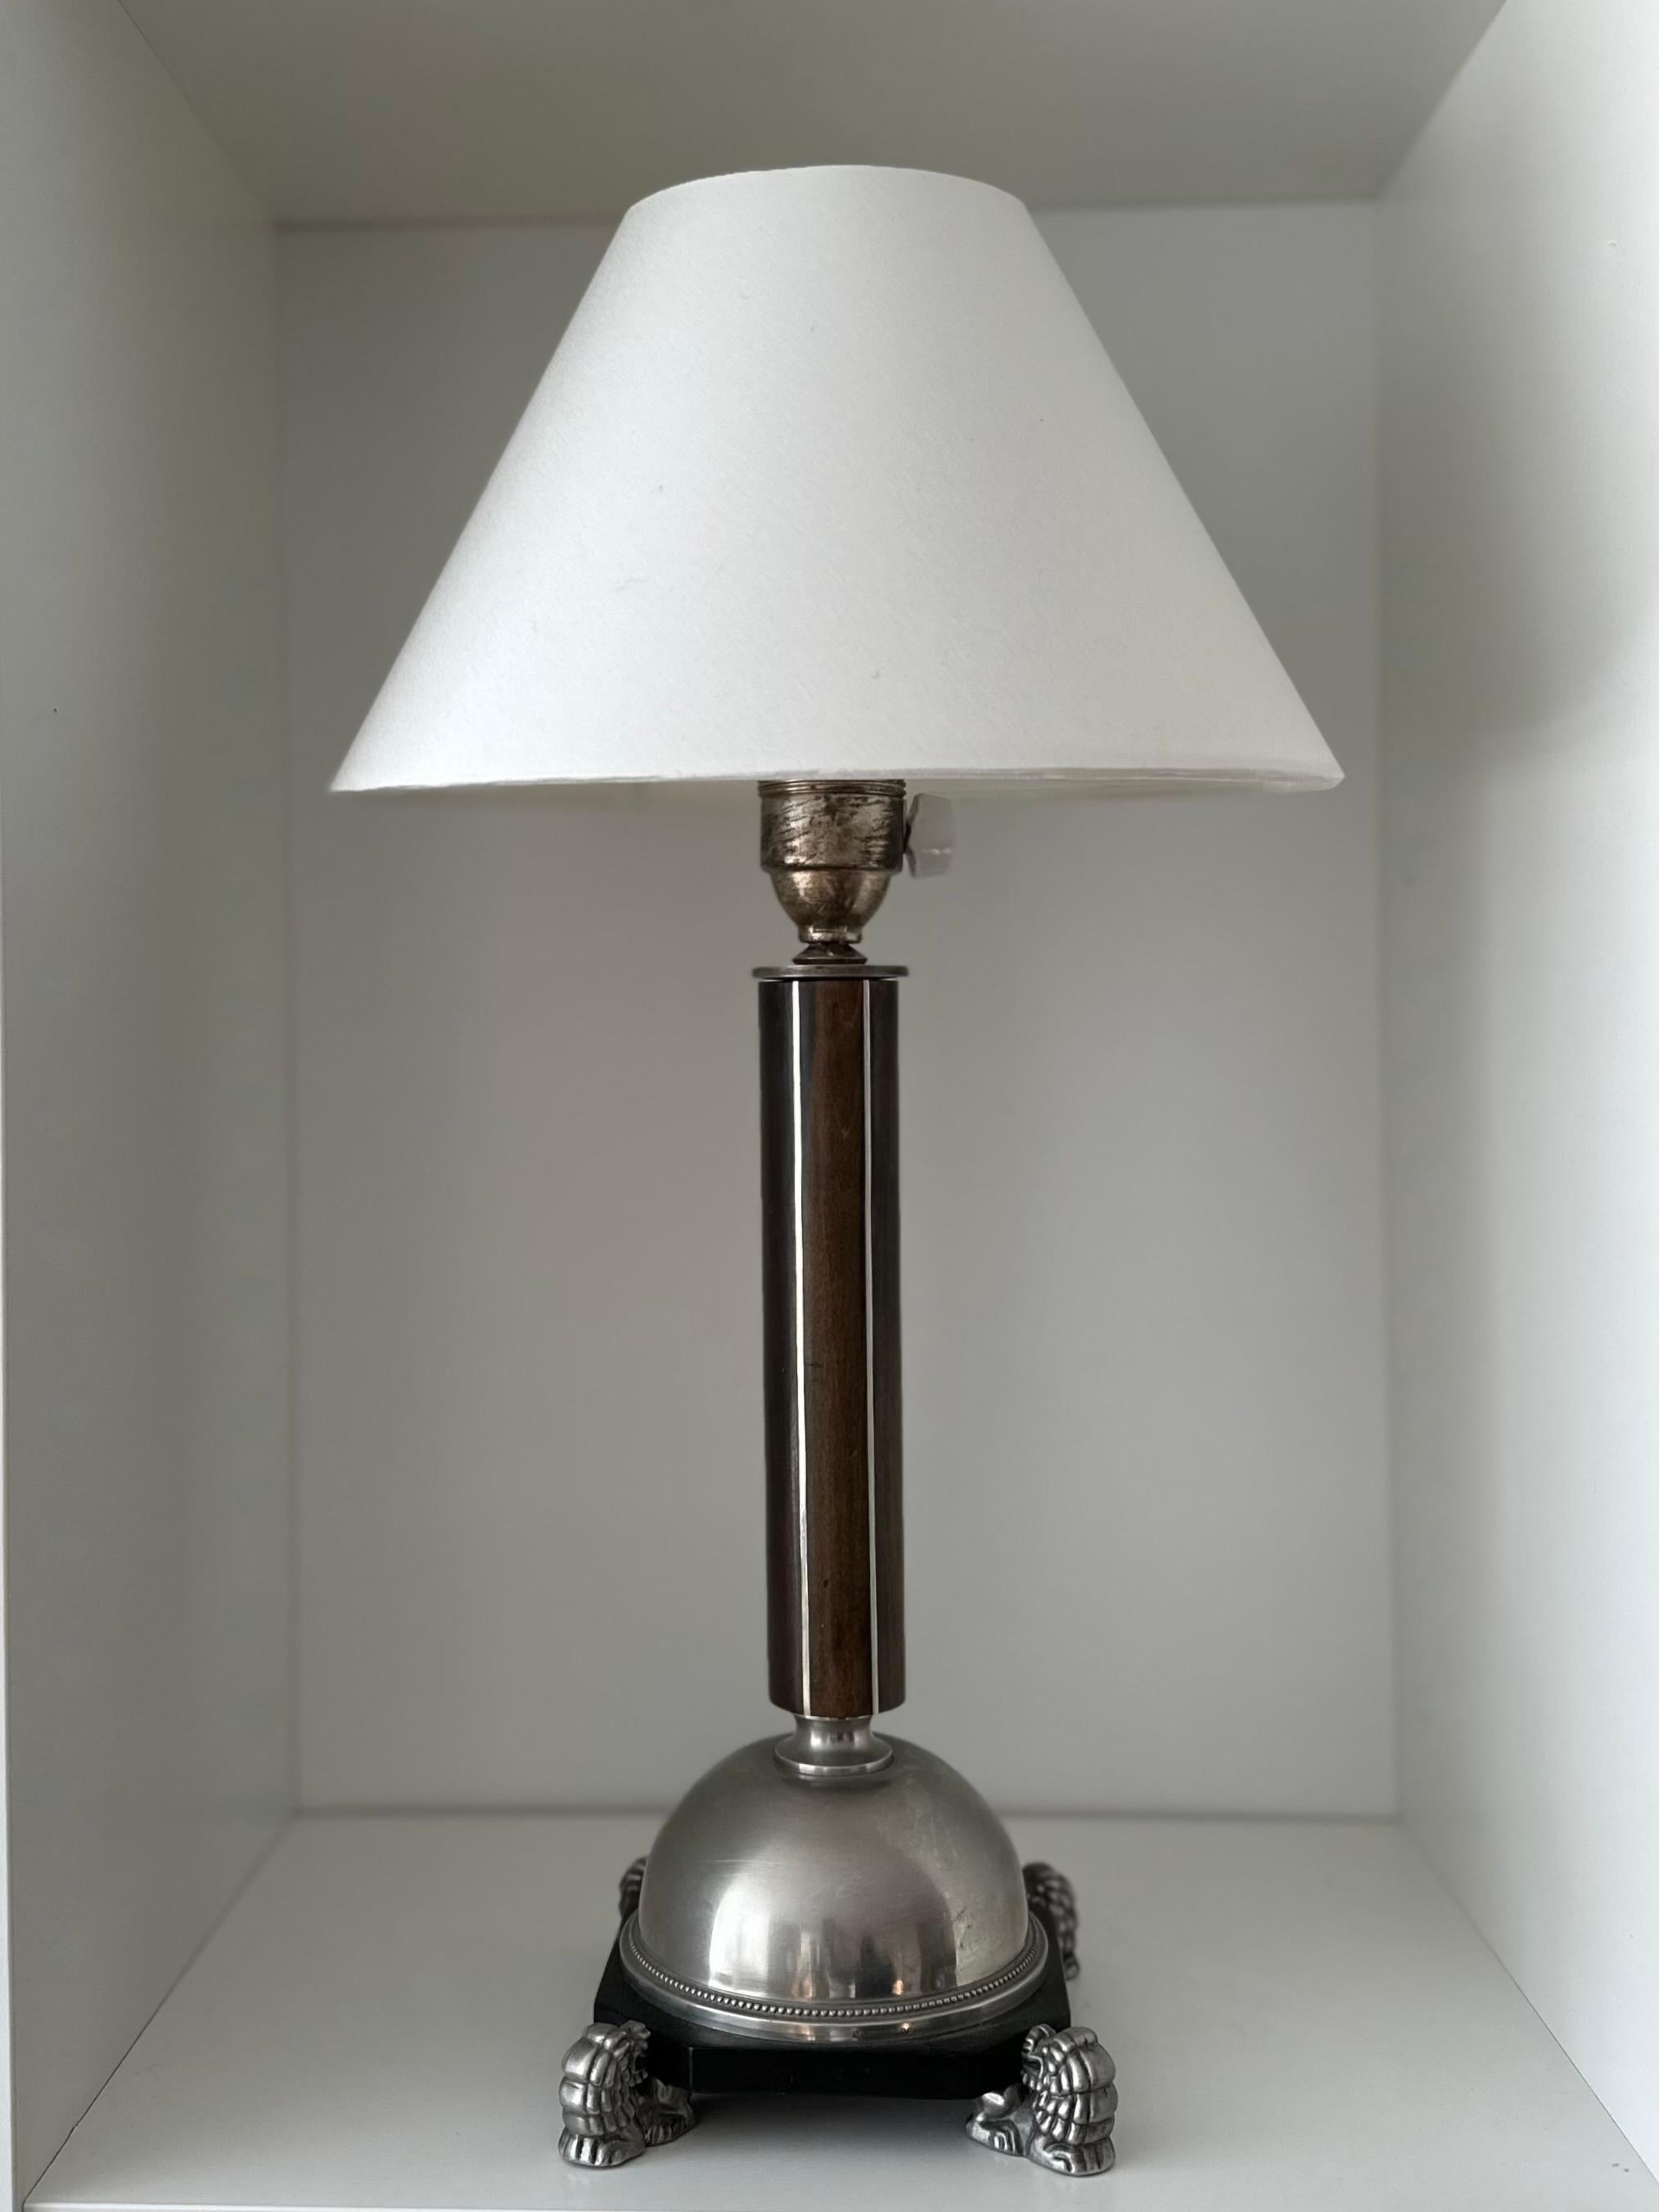 Scandinavian Modern Swedish Grace Pewter Table Lamp Likely by Anna Petrus, C.G. Hallberg, 1930s